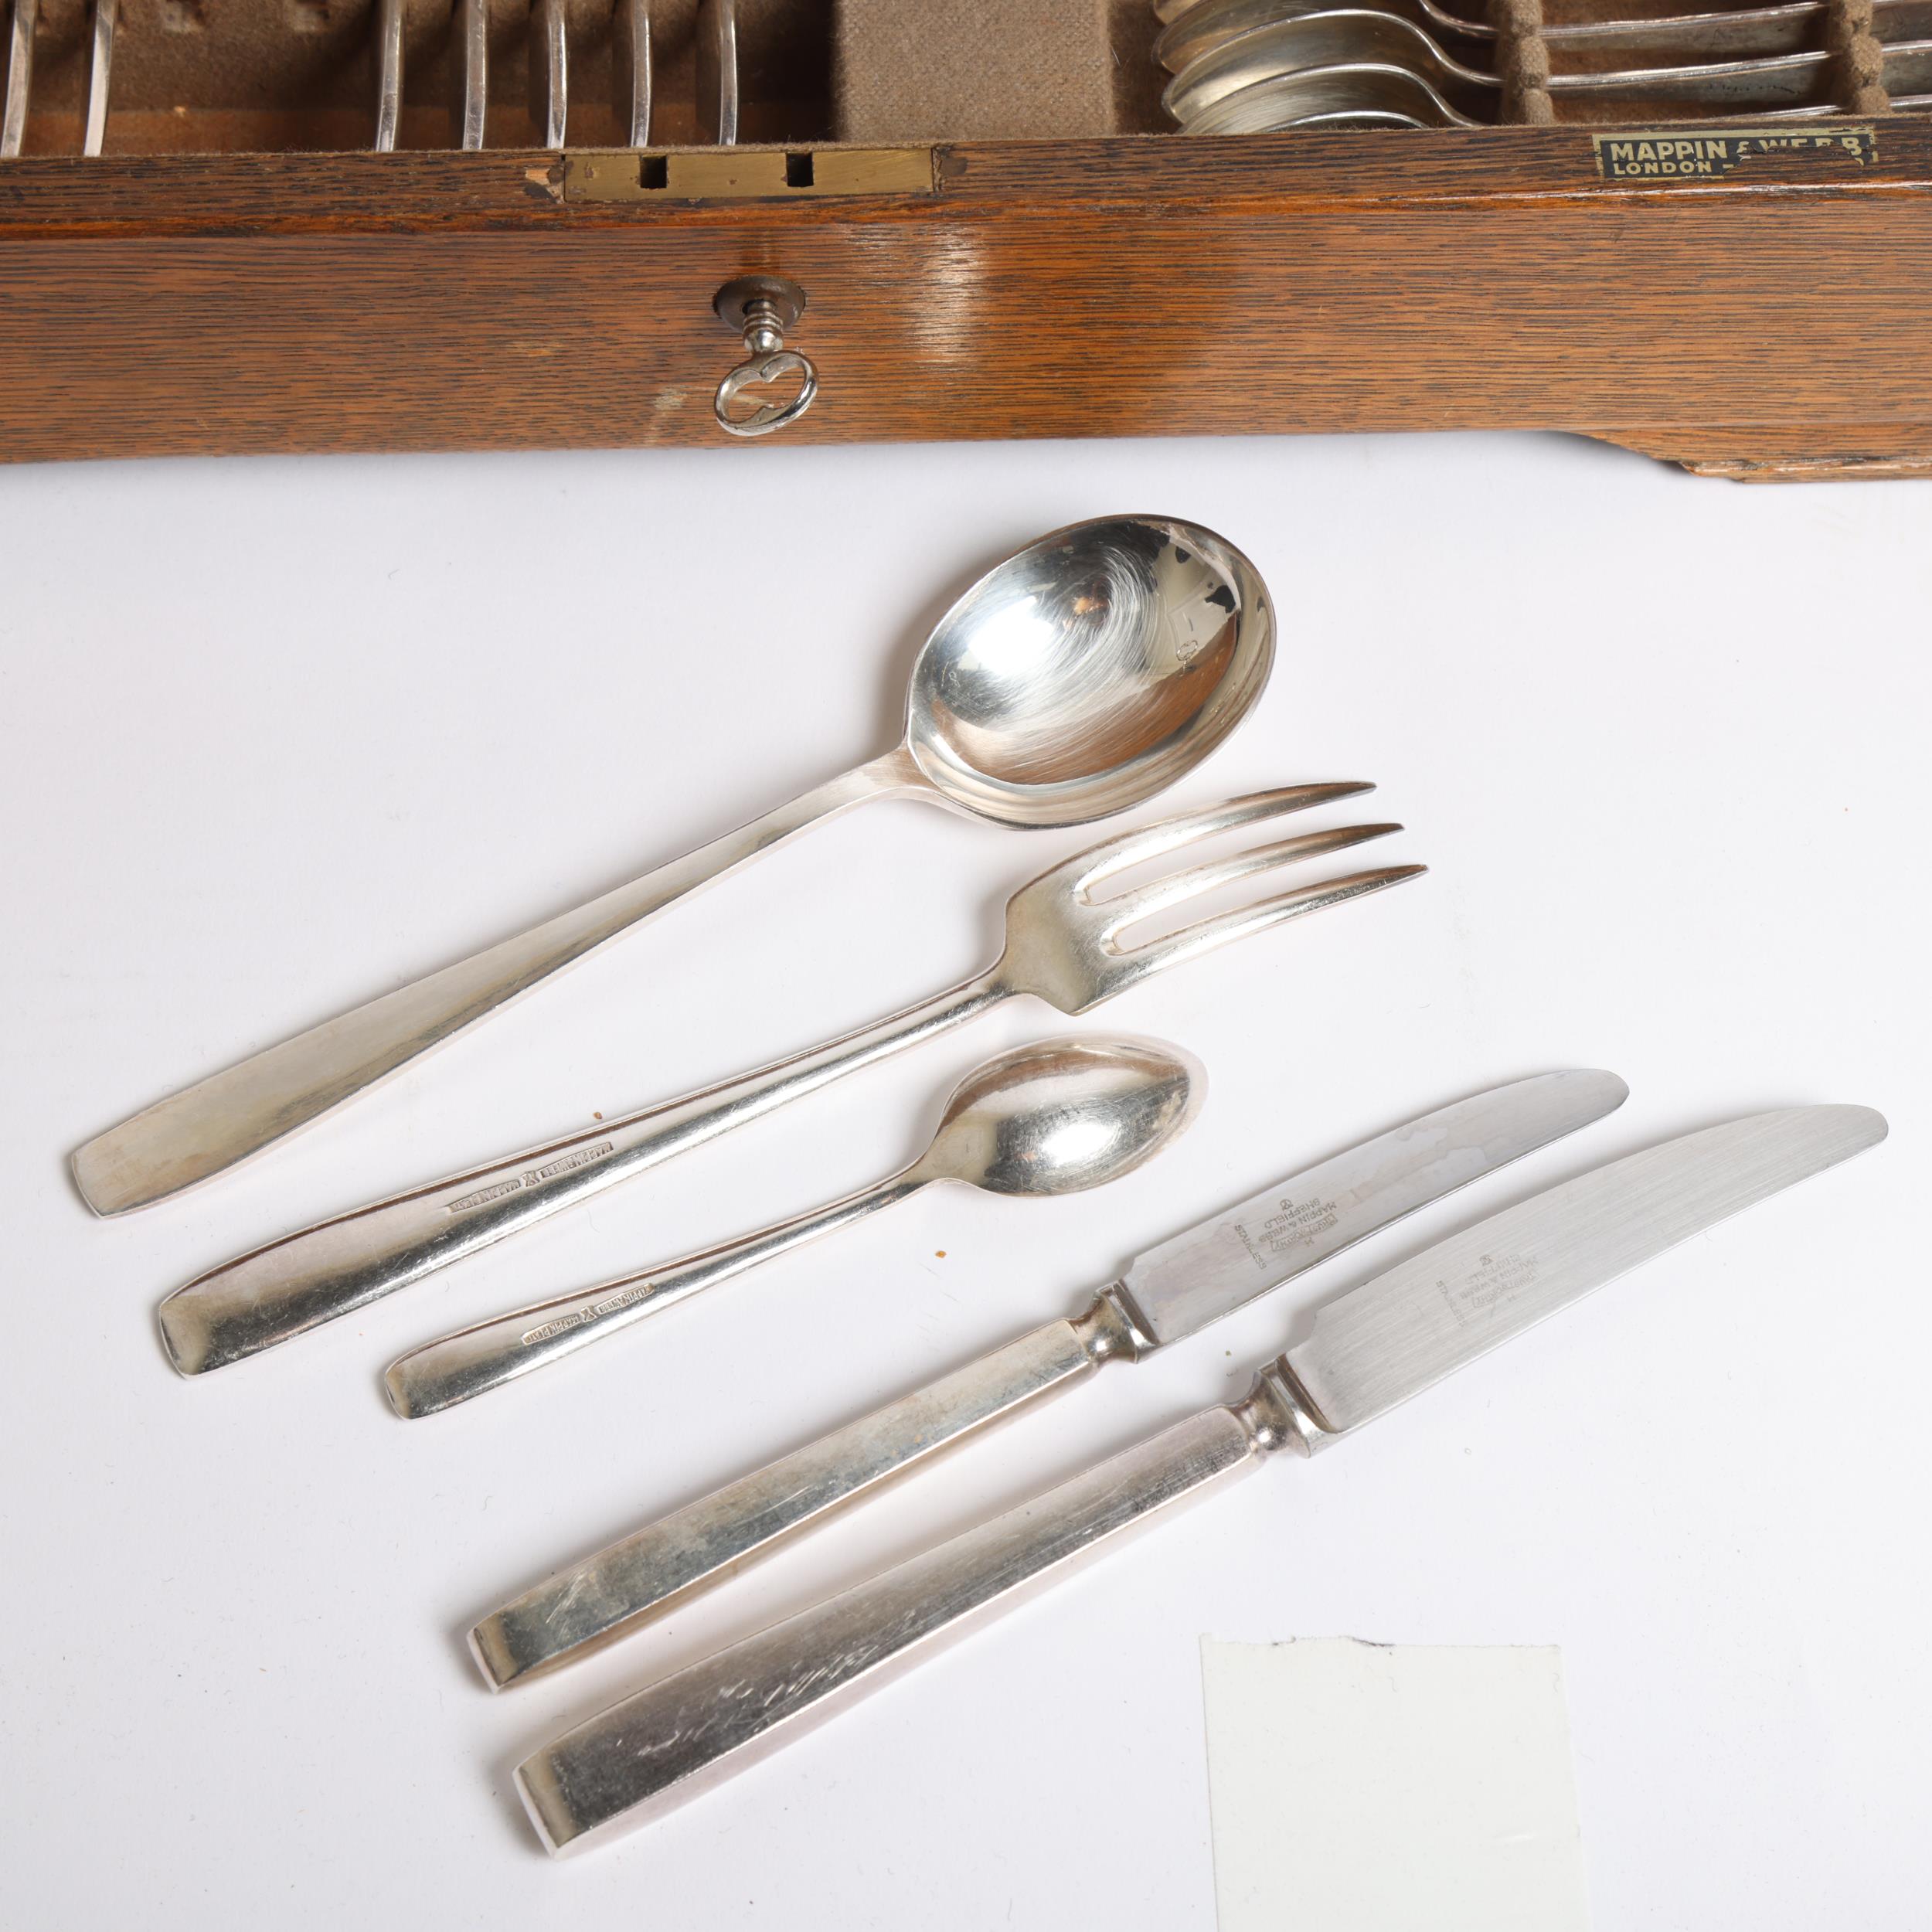 MAPPIN & WEBB - a silver plated canteen of cutlery for 6 people, in fitted oak case (carving set - Image 2 of 2